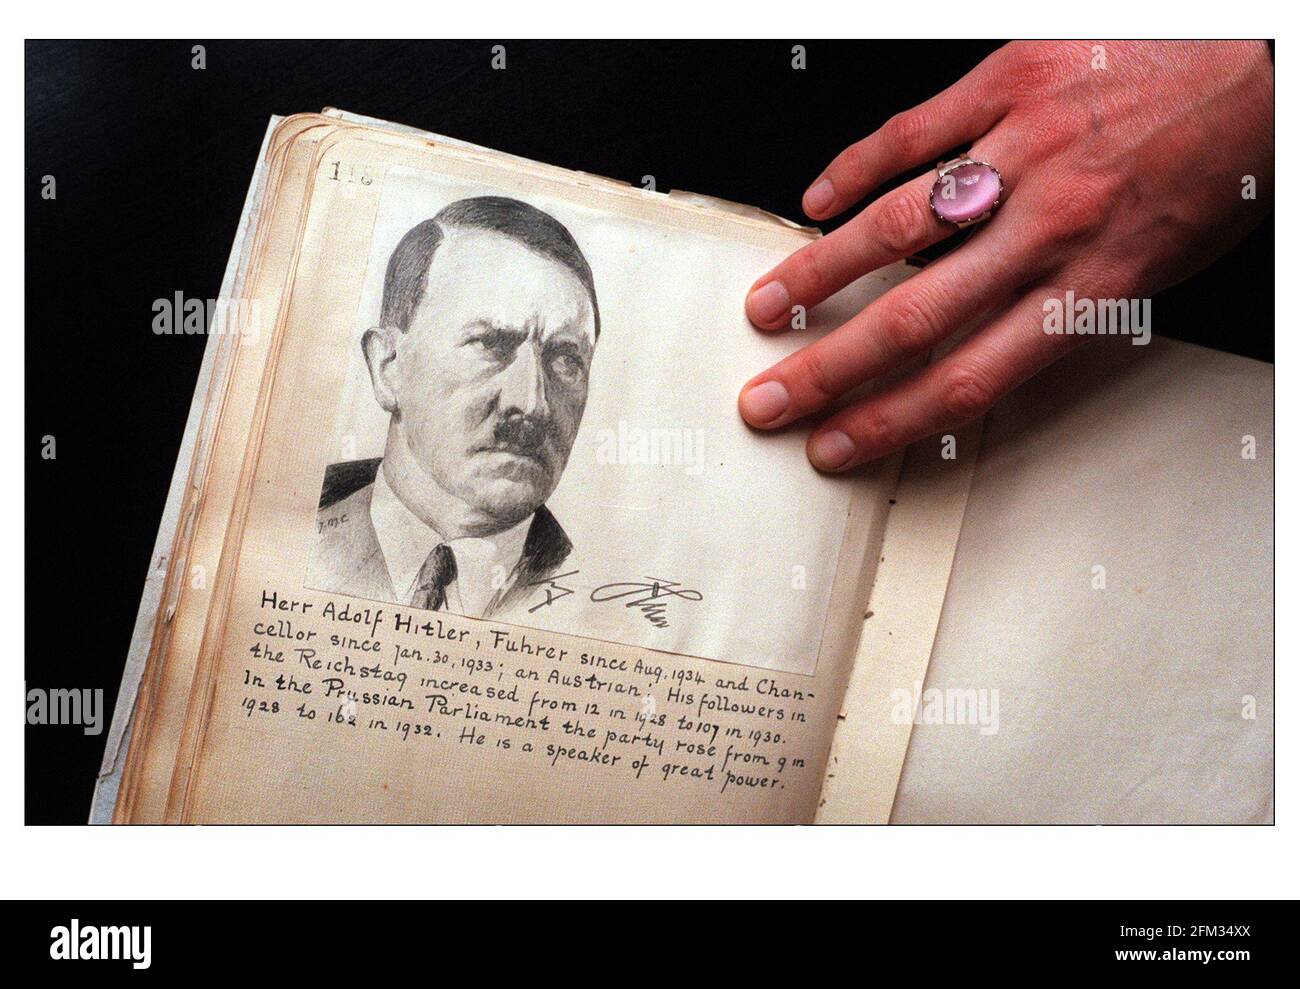 Adolf hitler portrait Cut Out Stock Images & Pictures - Alamy